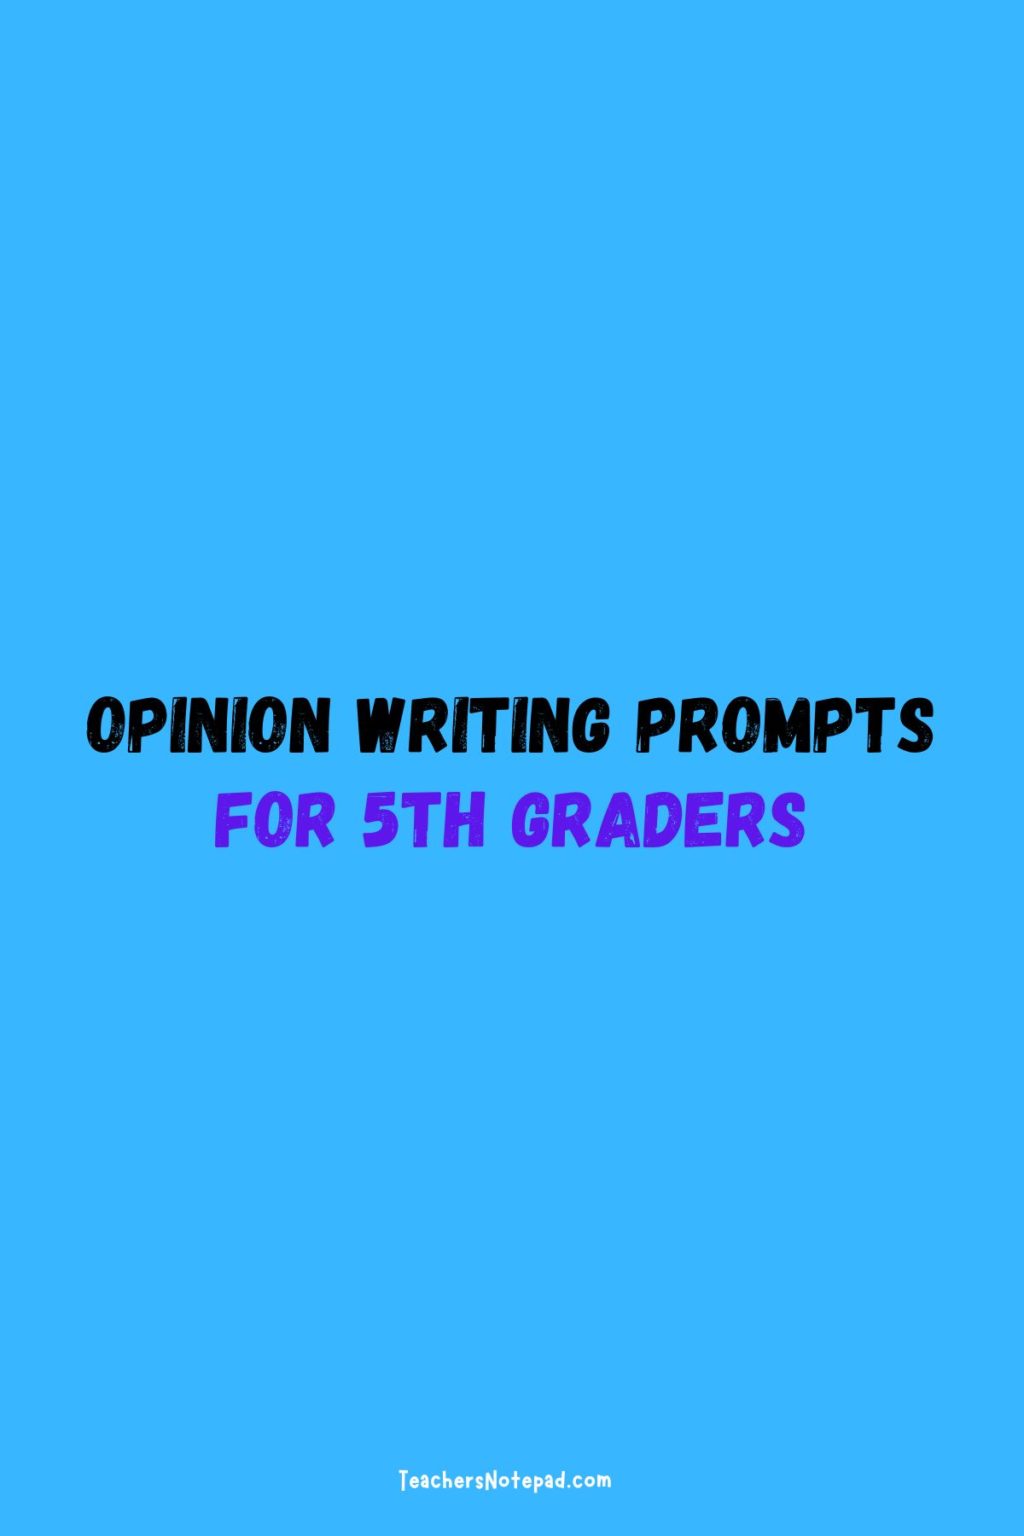 55-opinion-writing-prompts-for-5th-graders-teacher-s-notepad